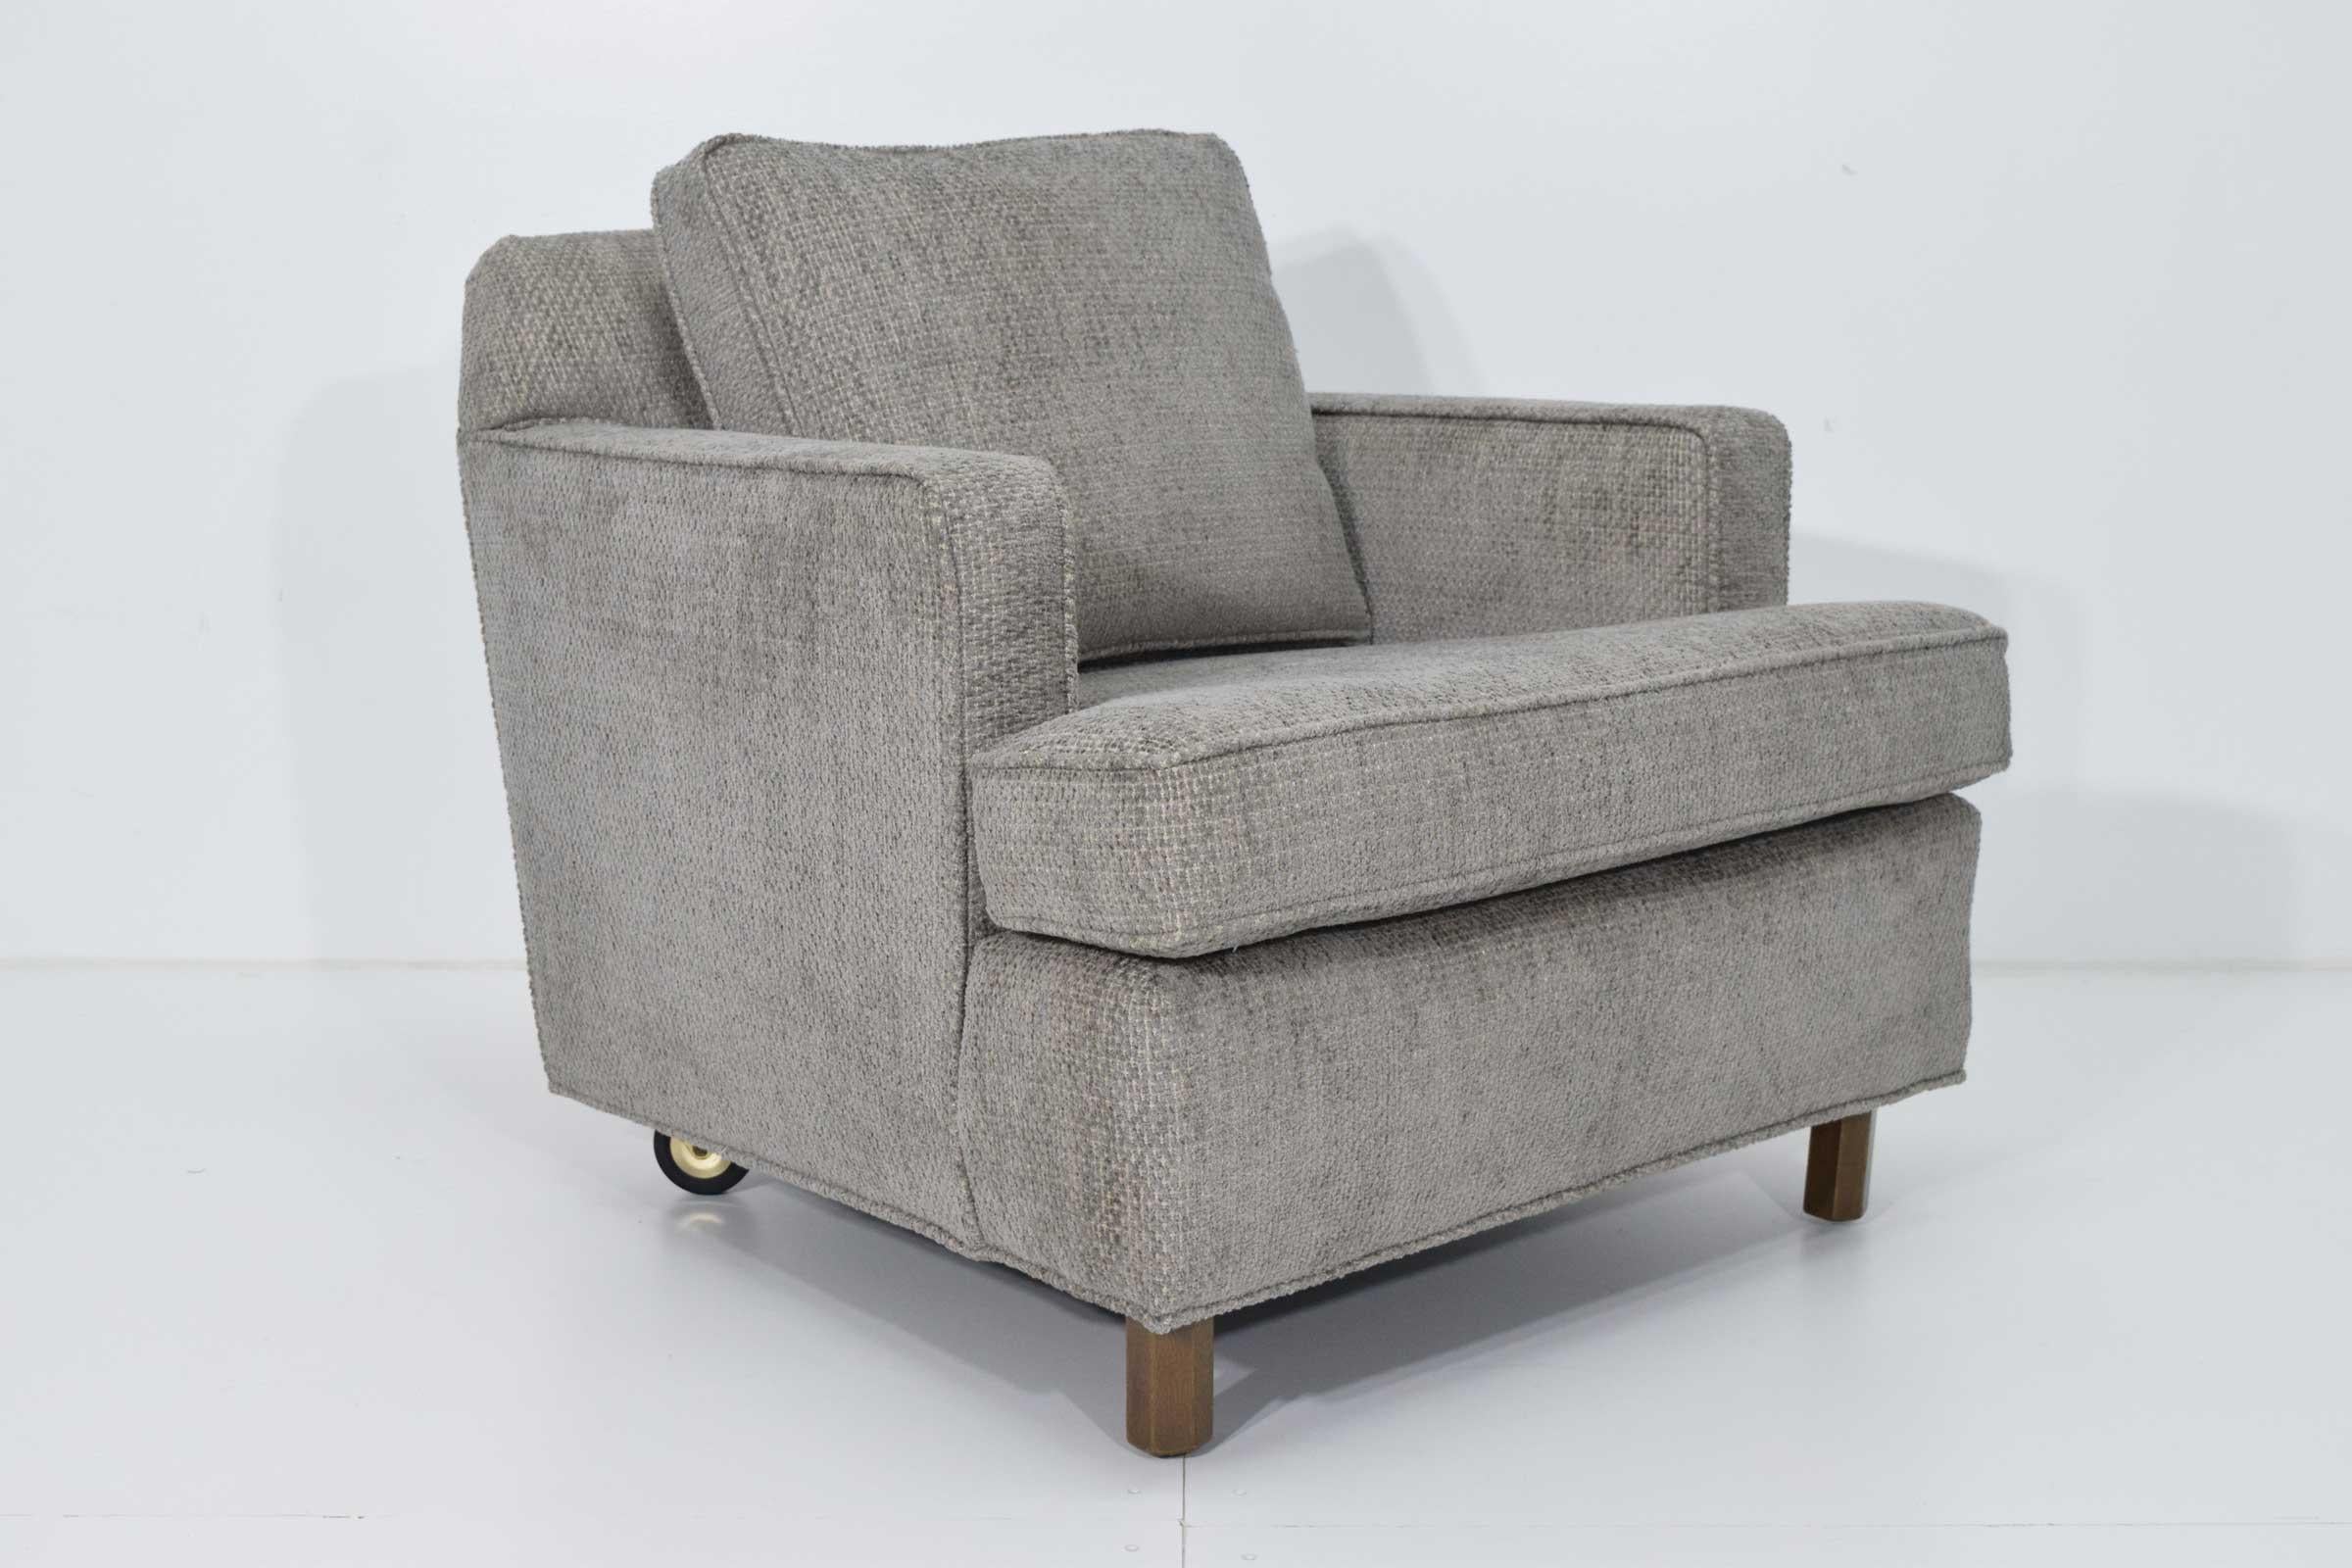 American Edward Wormley for Dunbar 1965 Lounge Chair and Ottoman in Gray Tweed For Sale